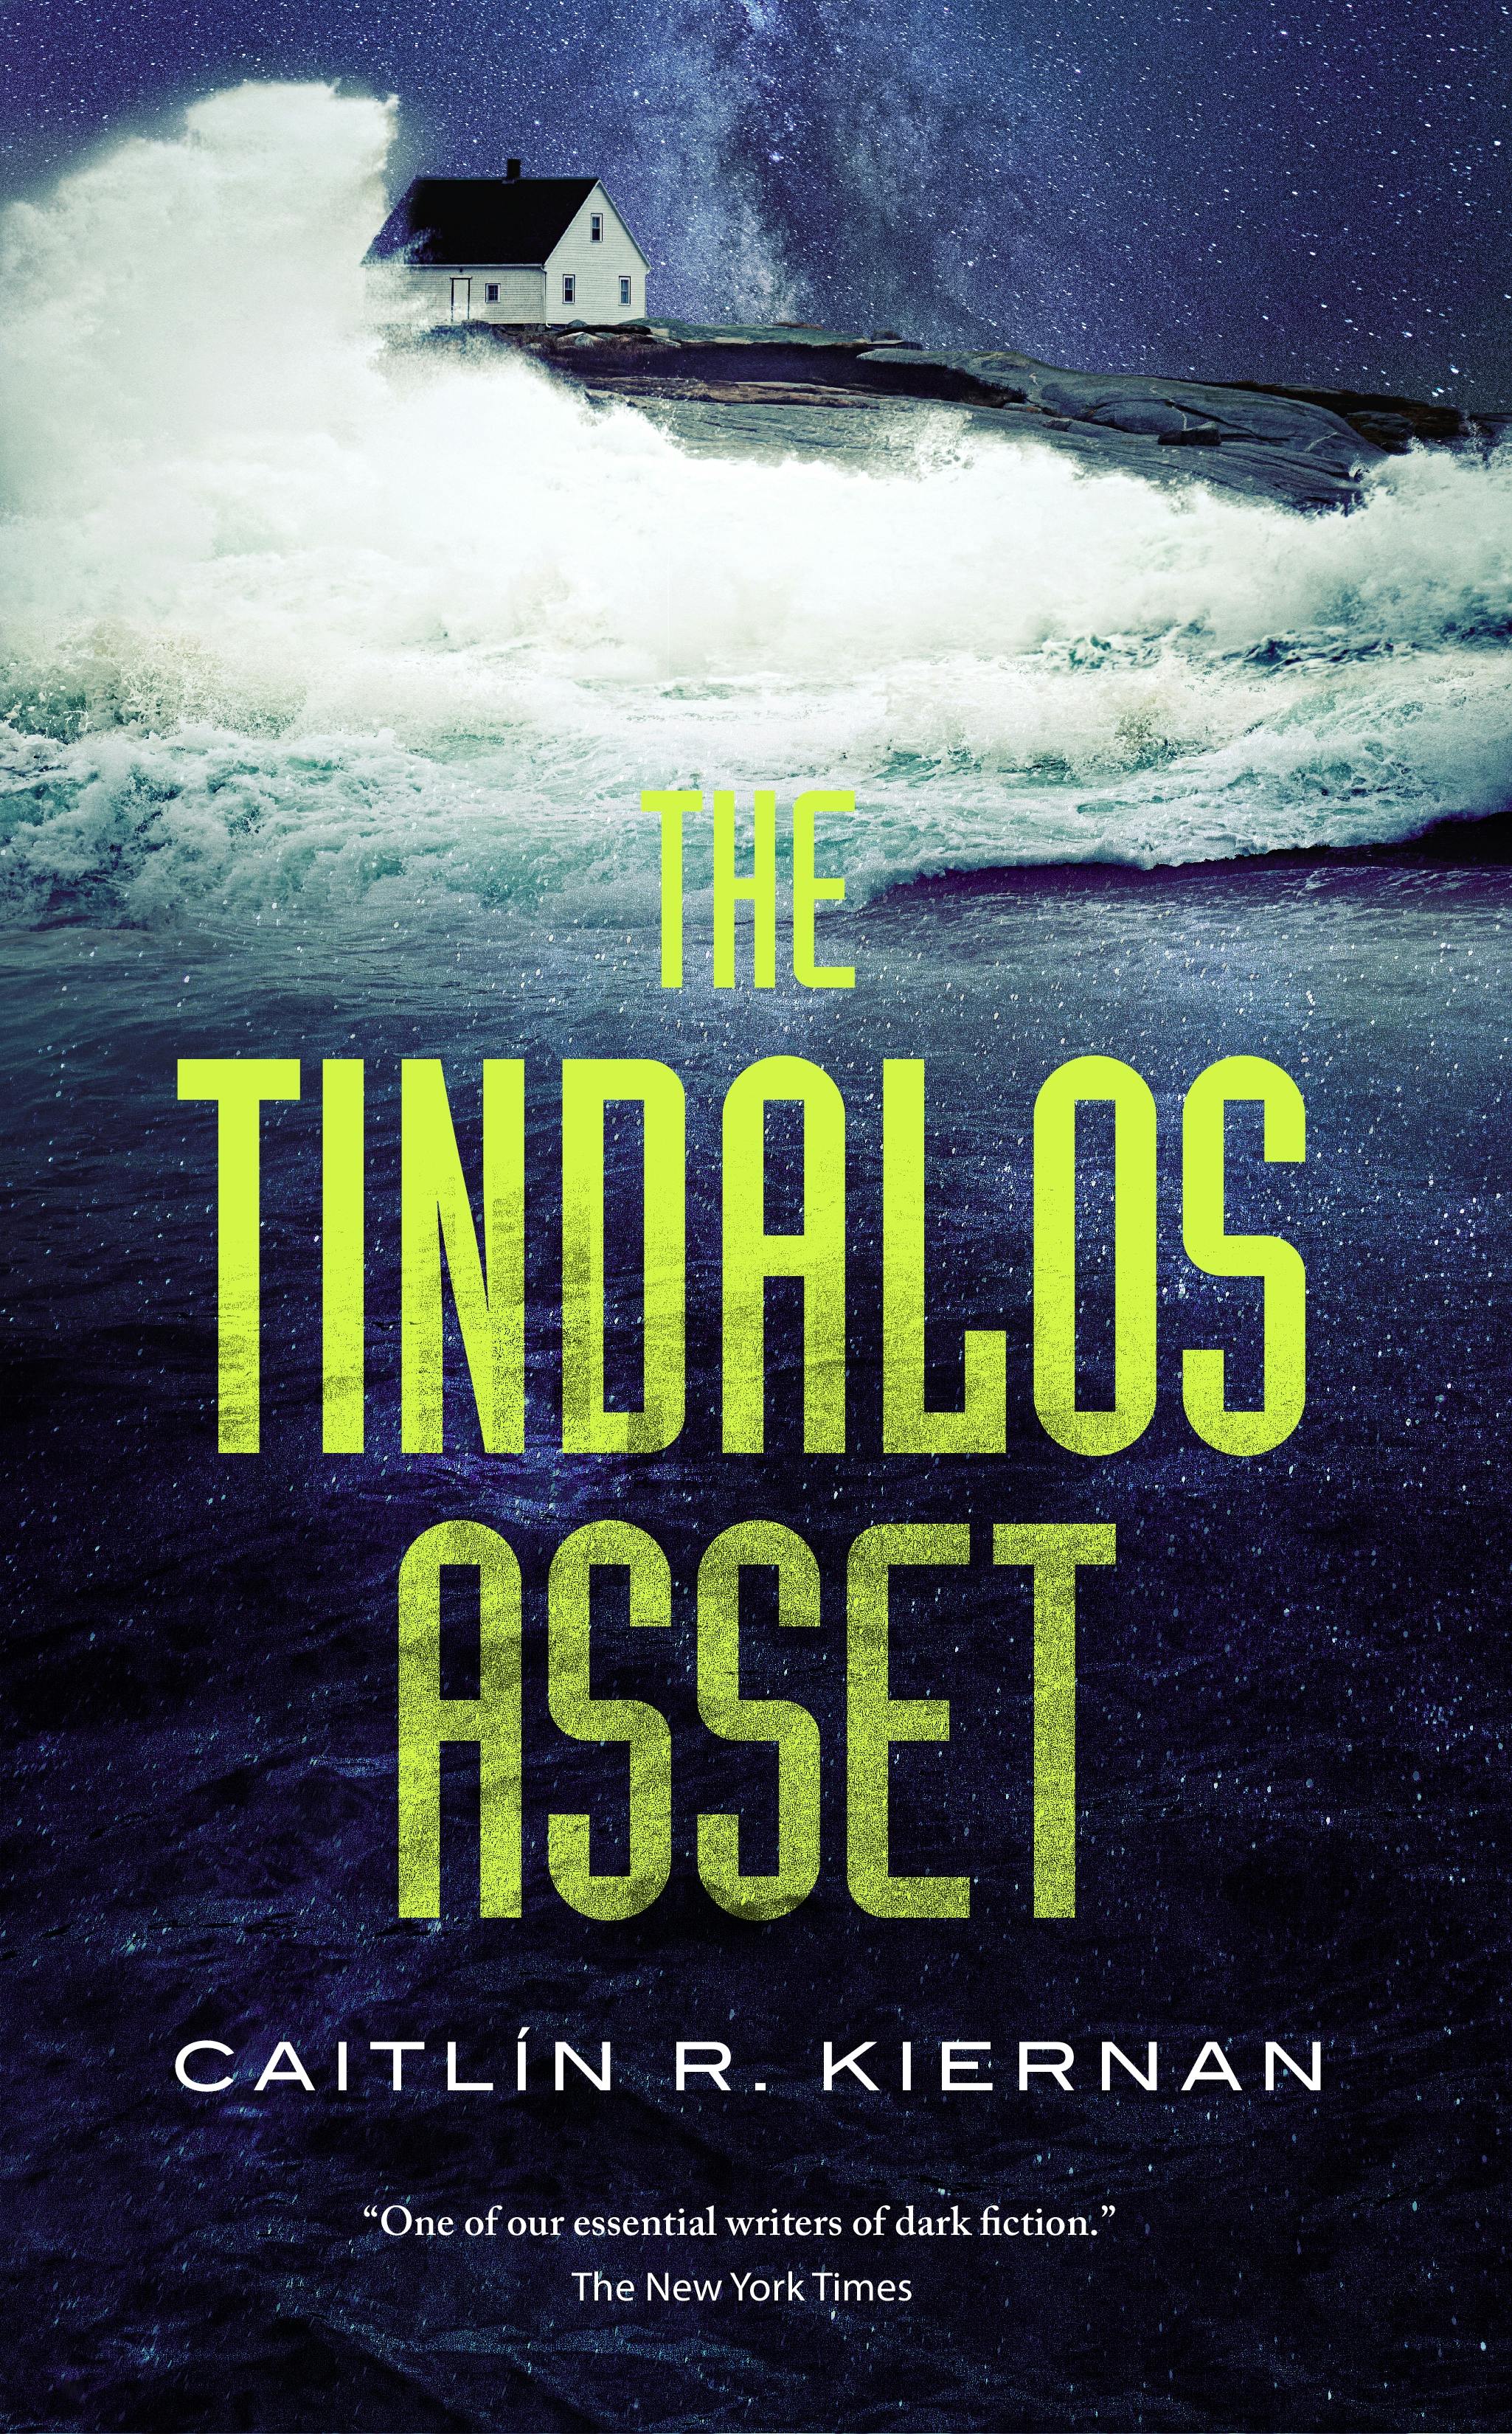 Image of The Tindalos Asset